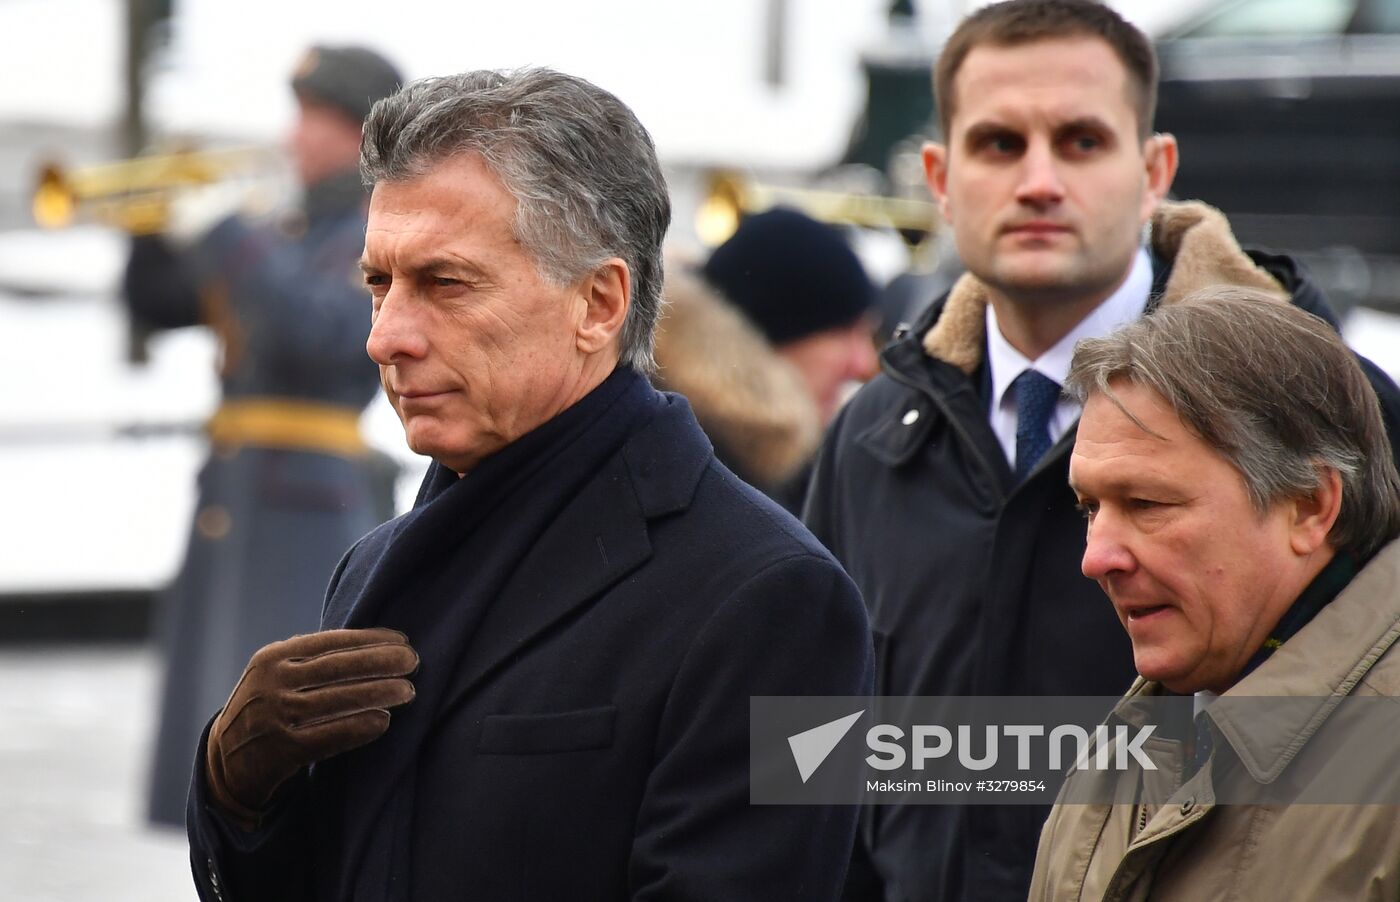 President of Argentina Mauricio Macri lays flowers at Tomb of Unknown Soldier